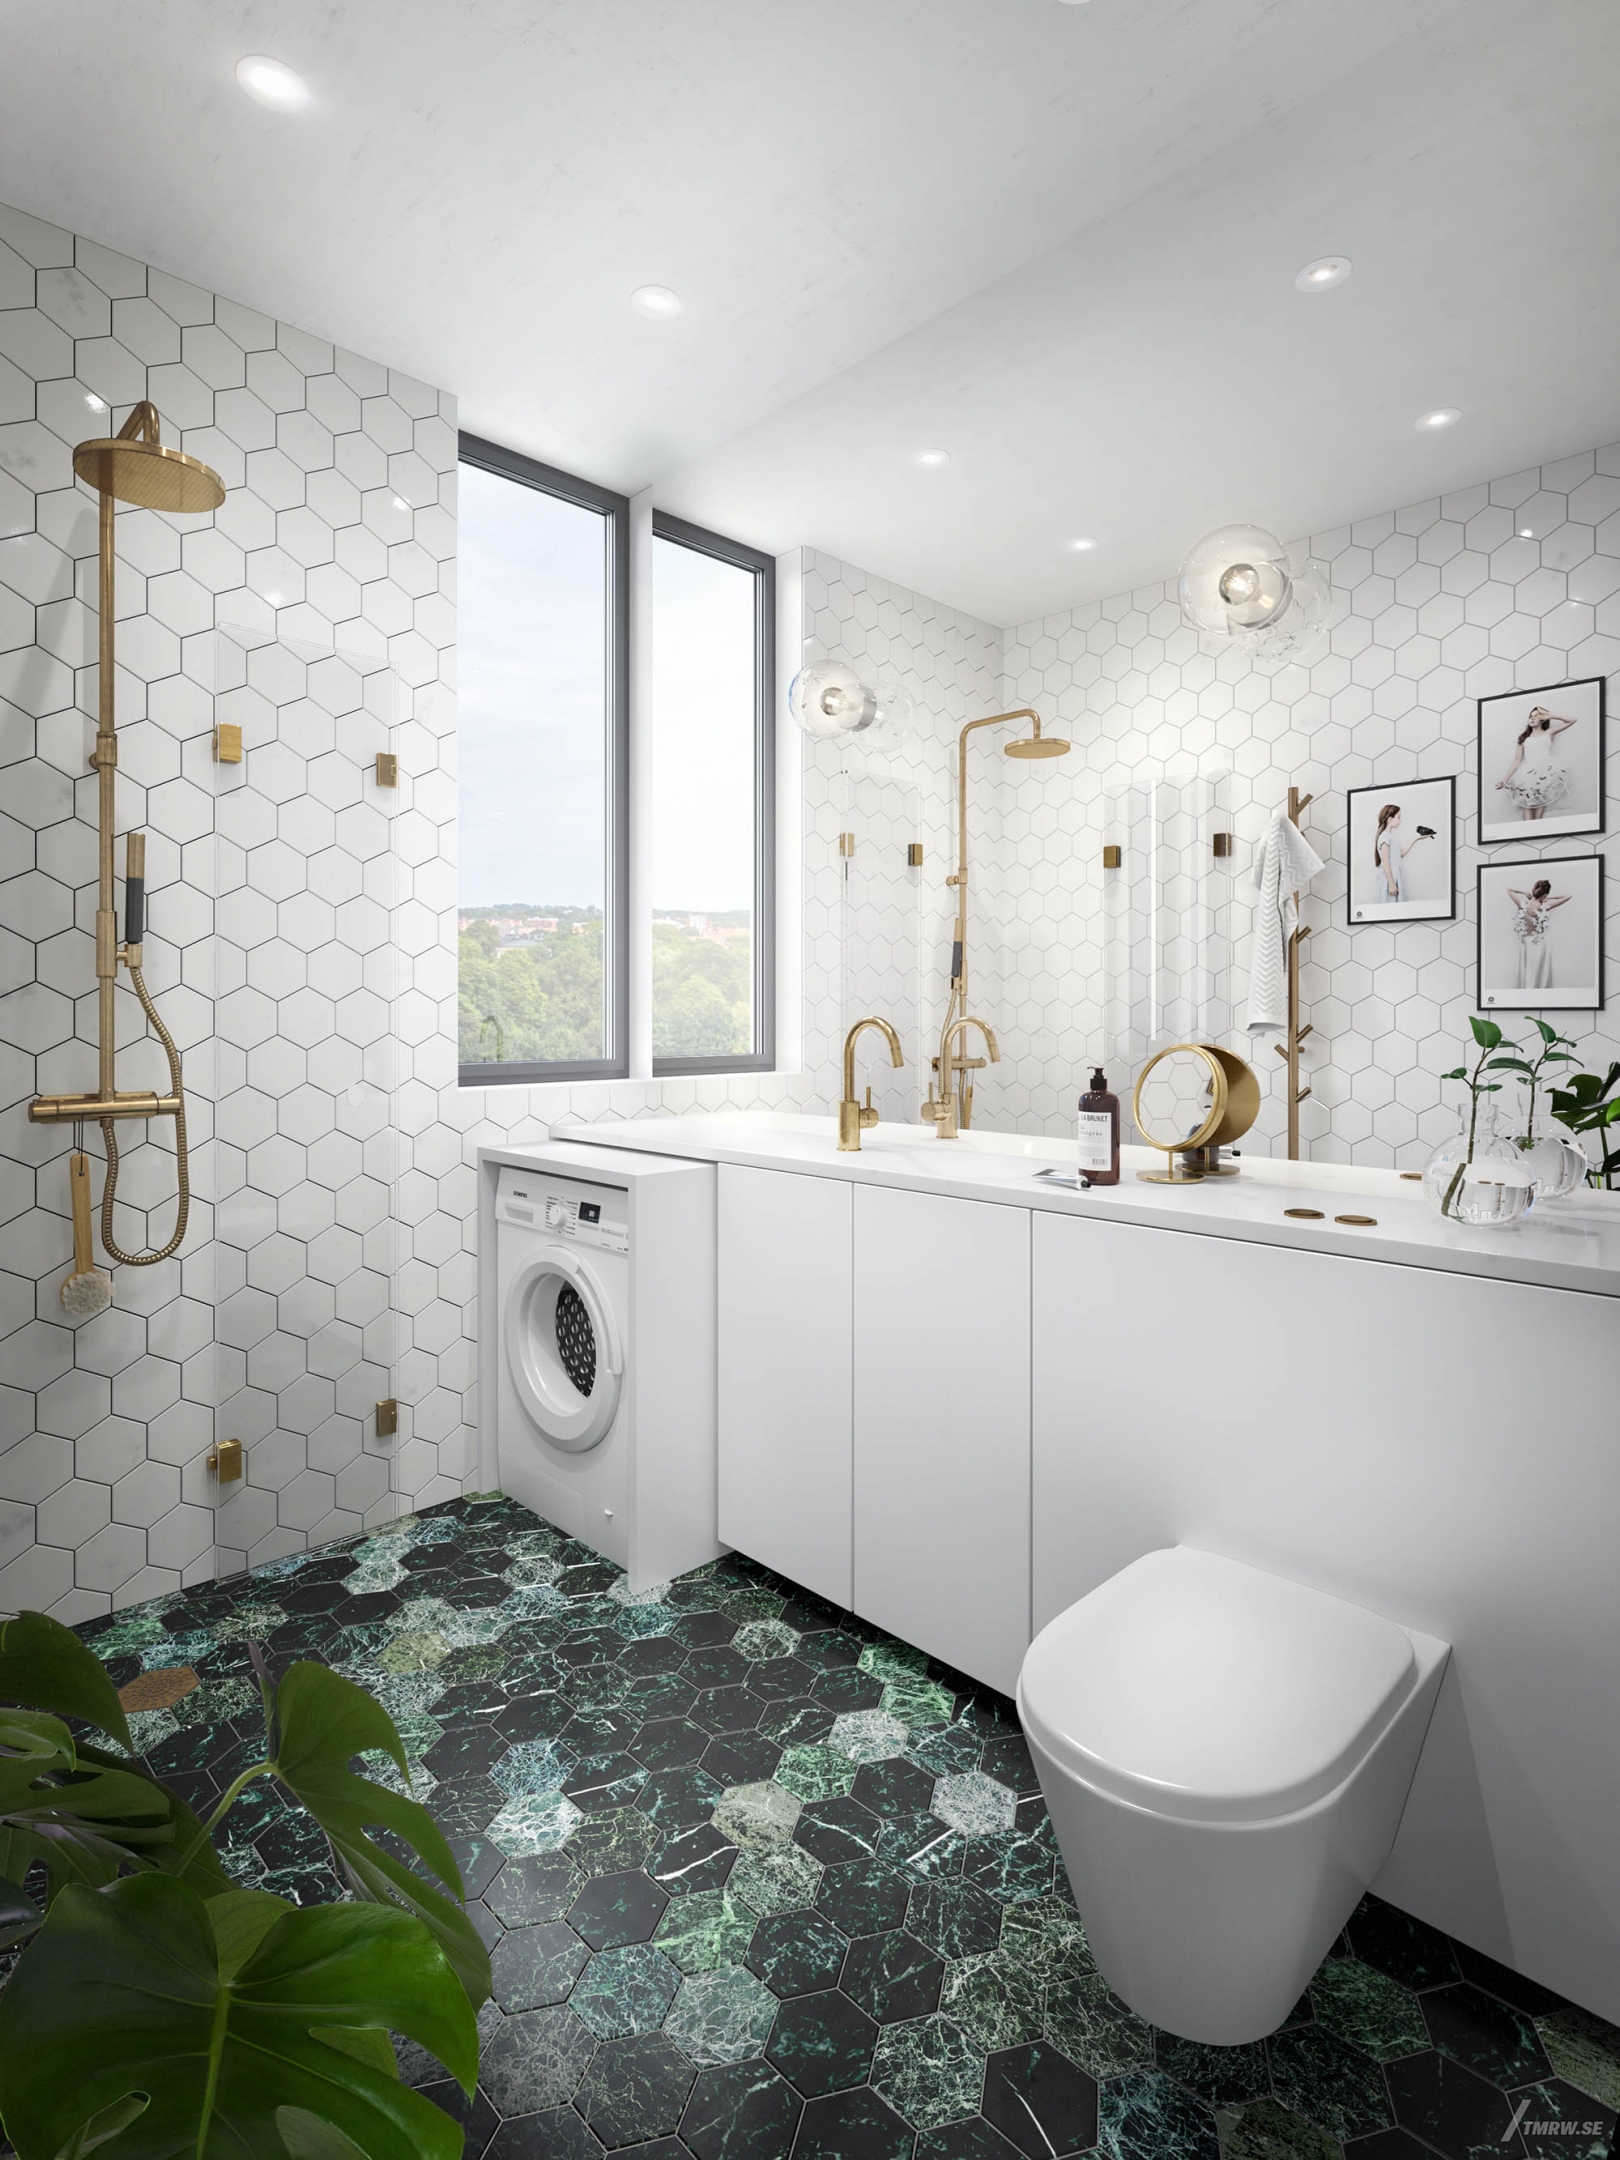 Architectural visualization of a bathroom for Kontrast a interior in day light from an eye level view.